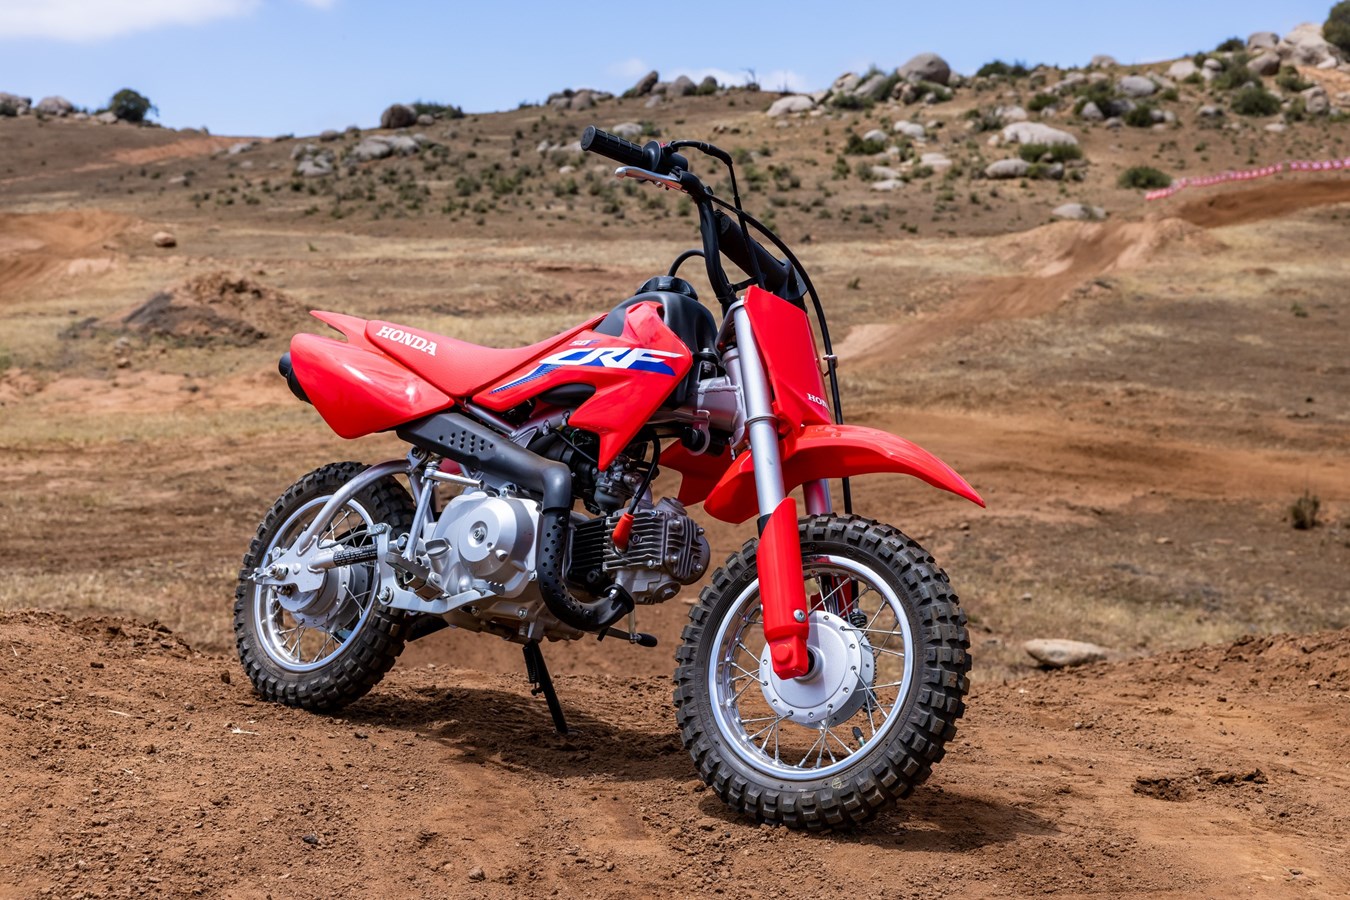 The CRF250R and CRF250RX headline the 2022 CRF family updates